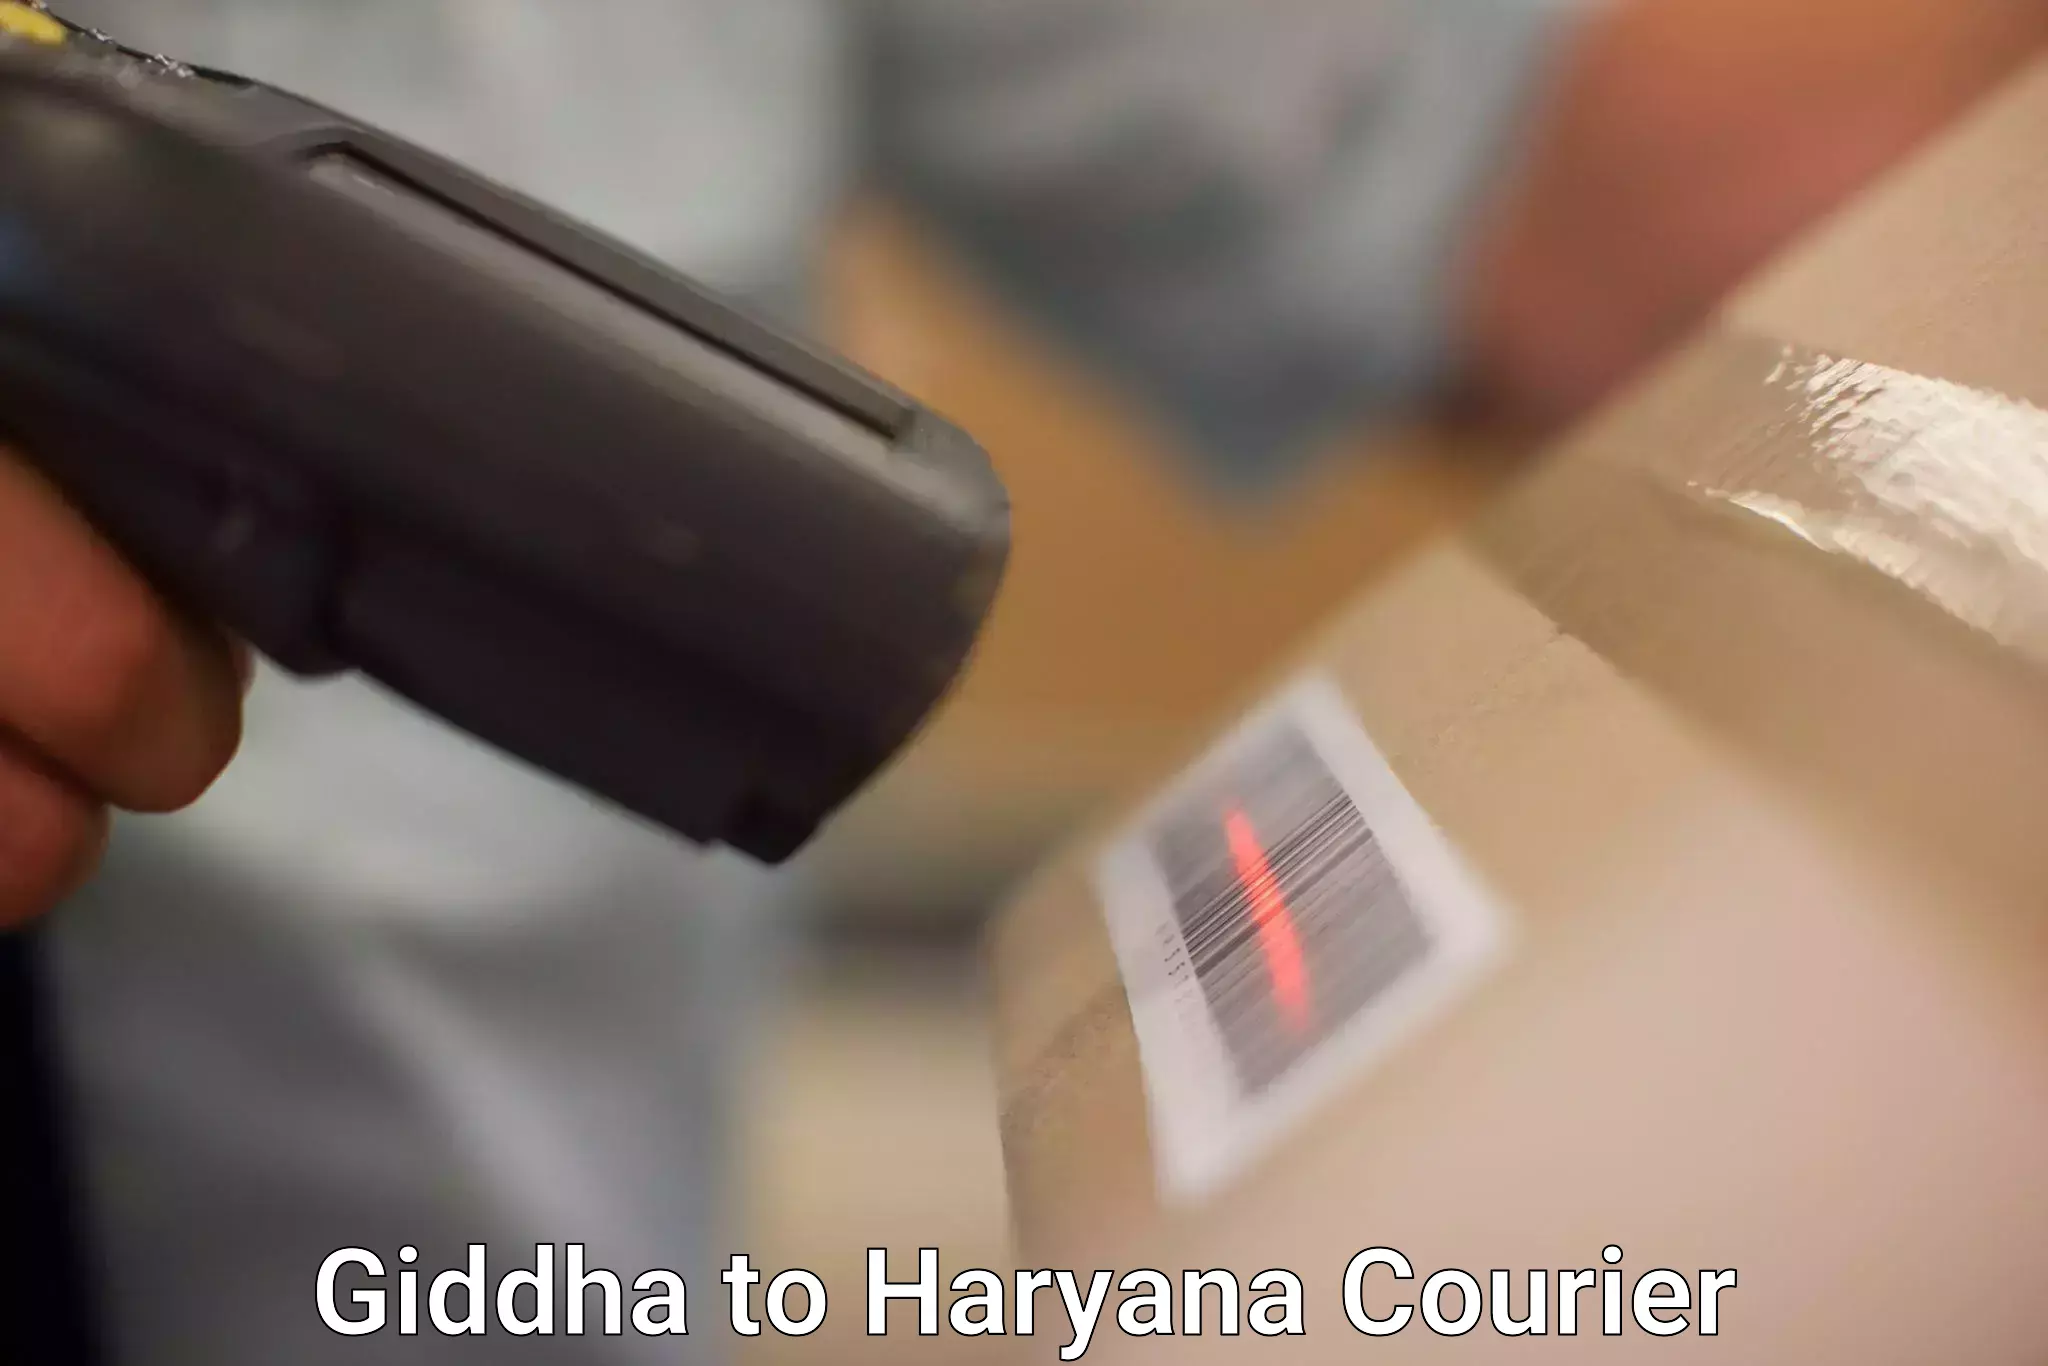 Package delivery network Giddha to Charkhi Dadri